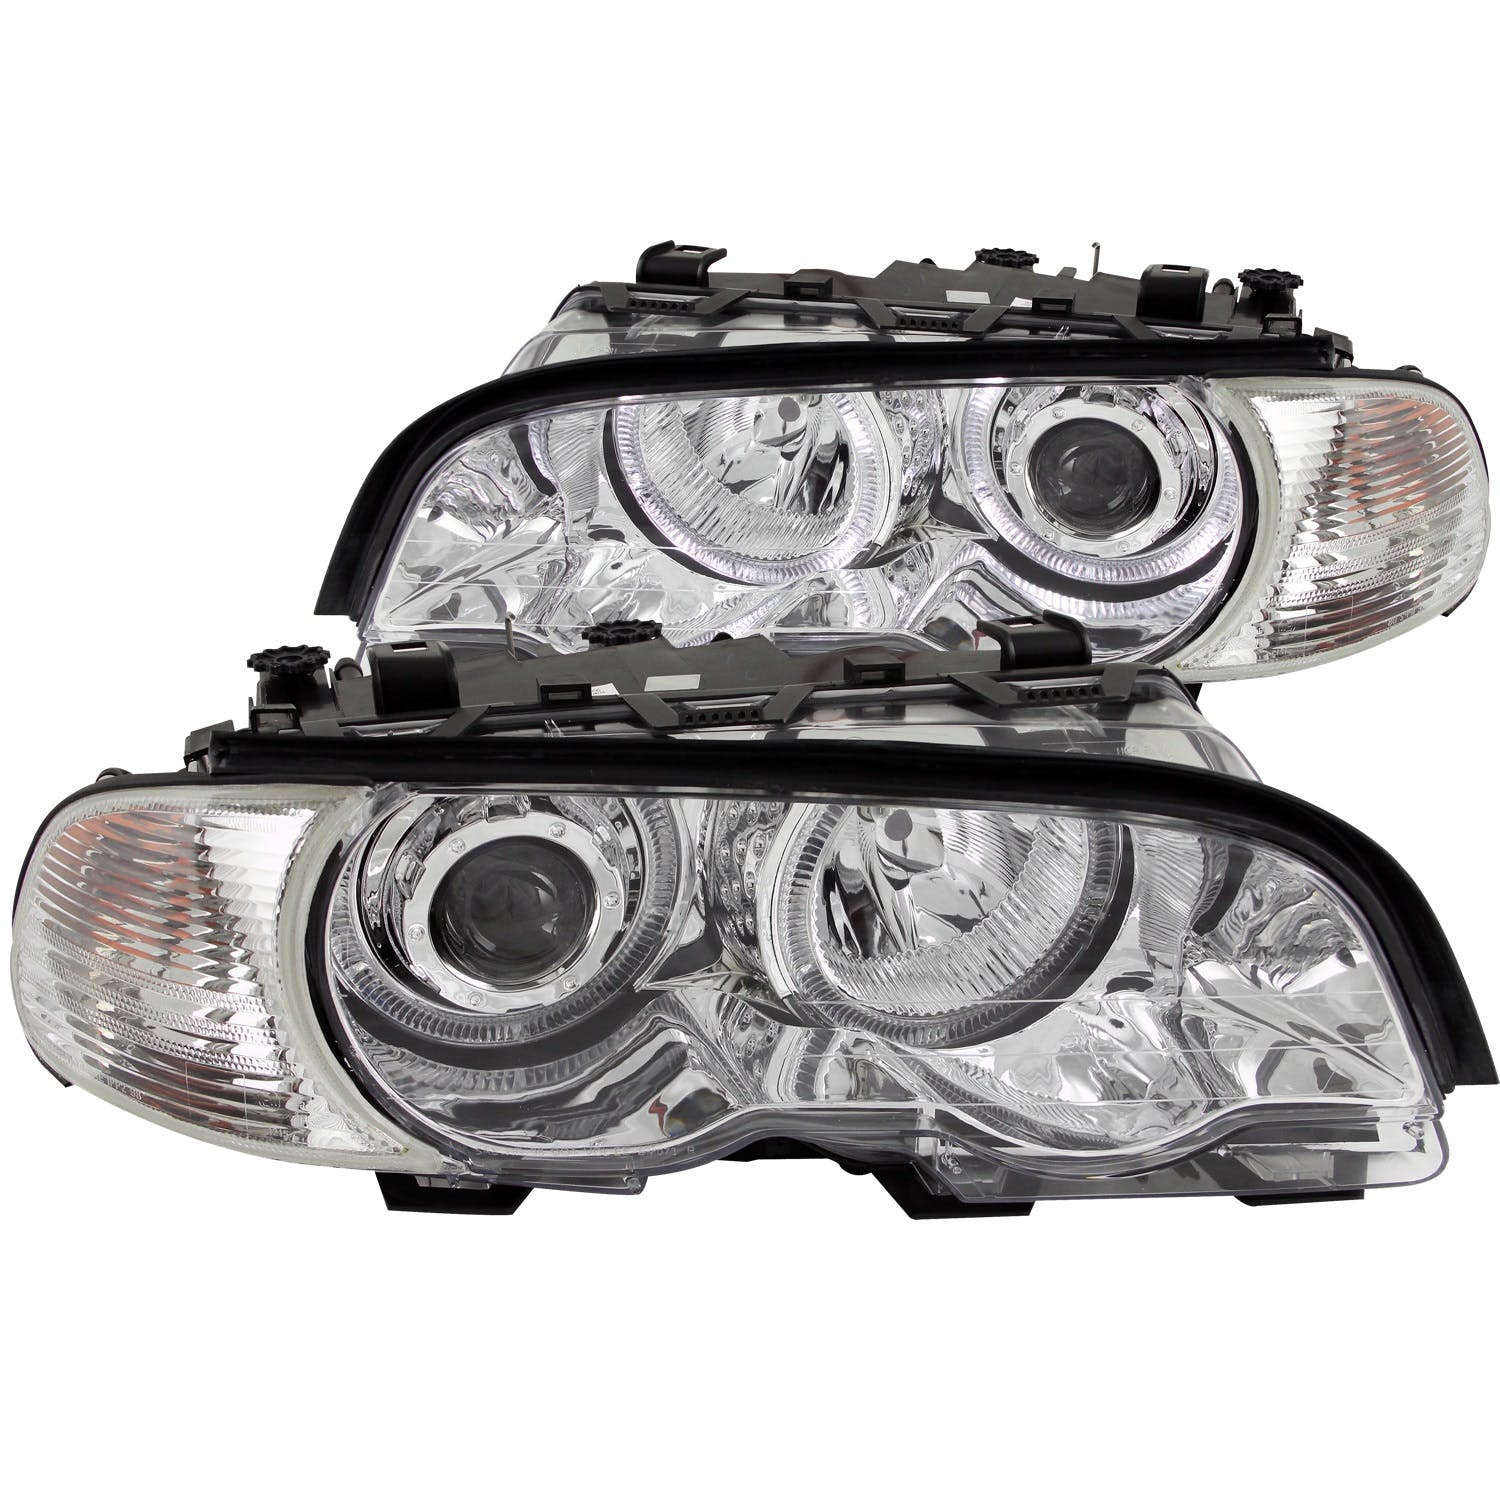 AnzoUSA 121268 Projector Headlights with Halo Chrome